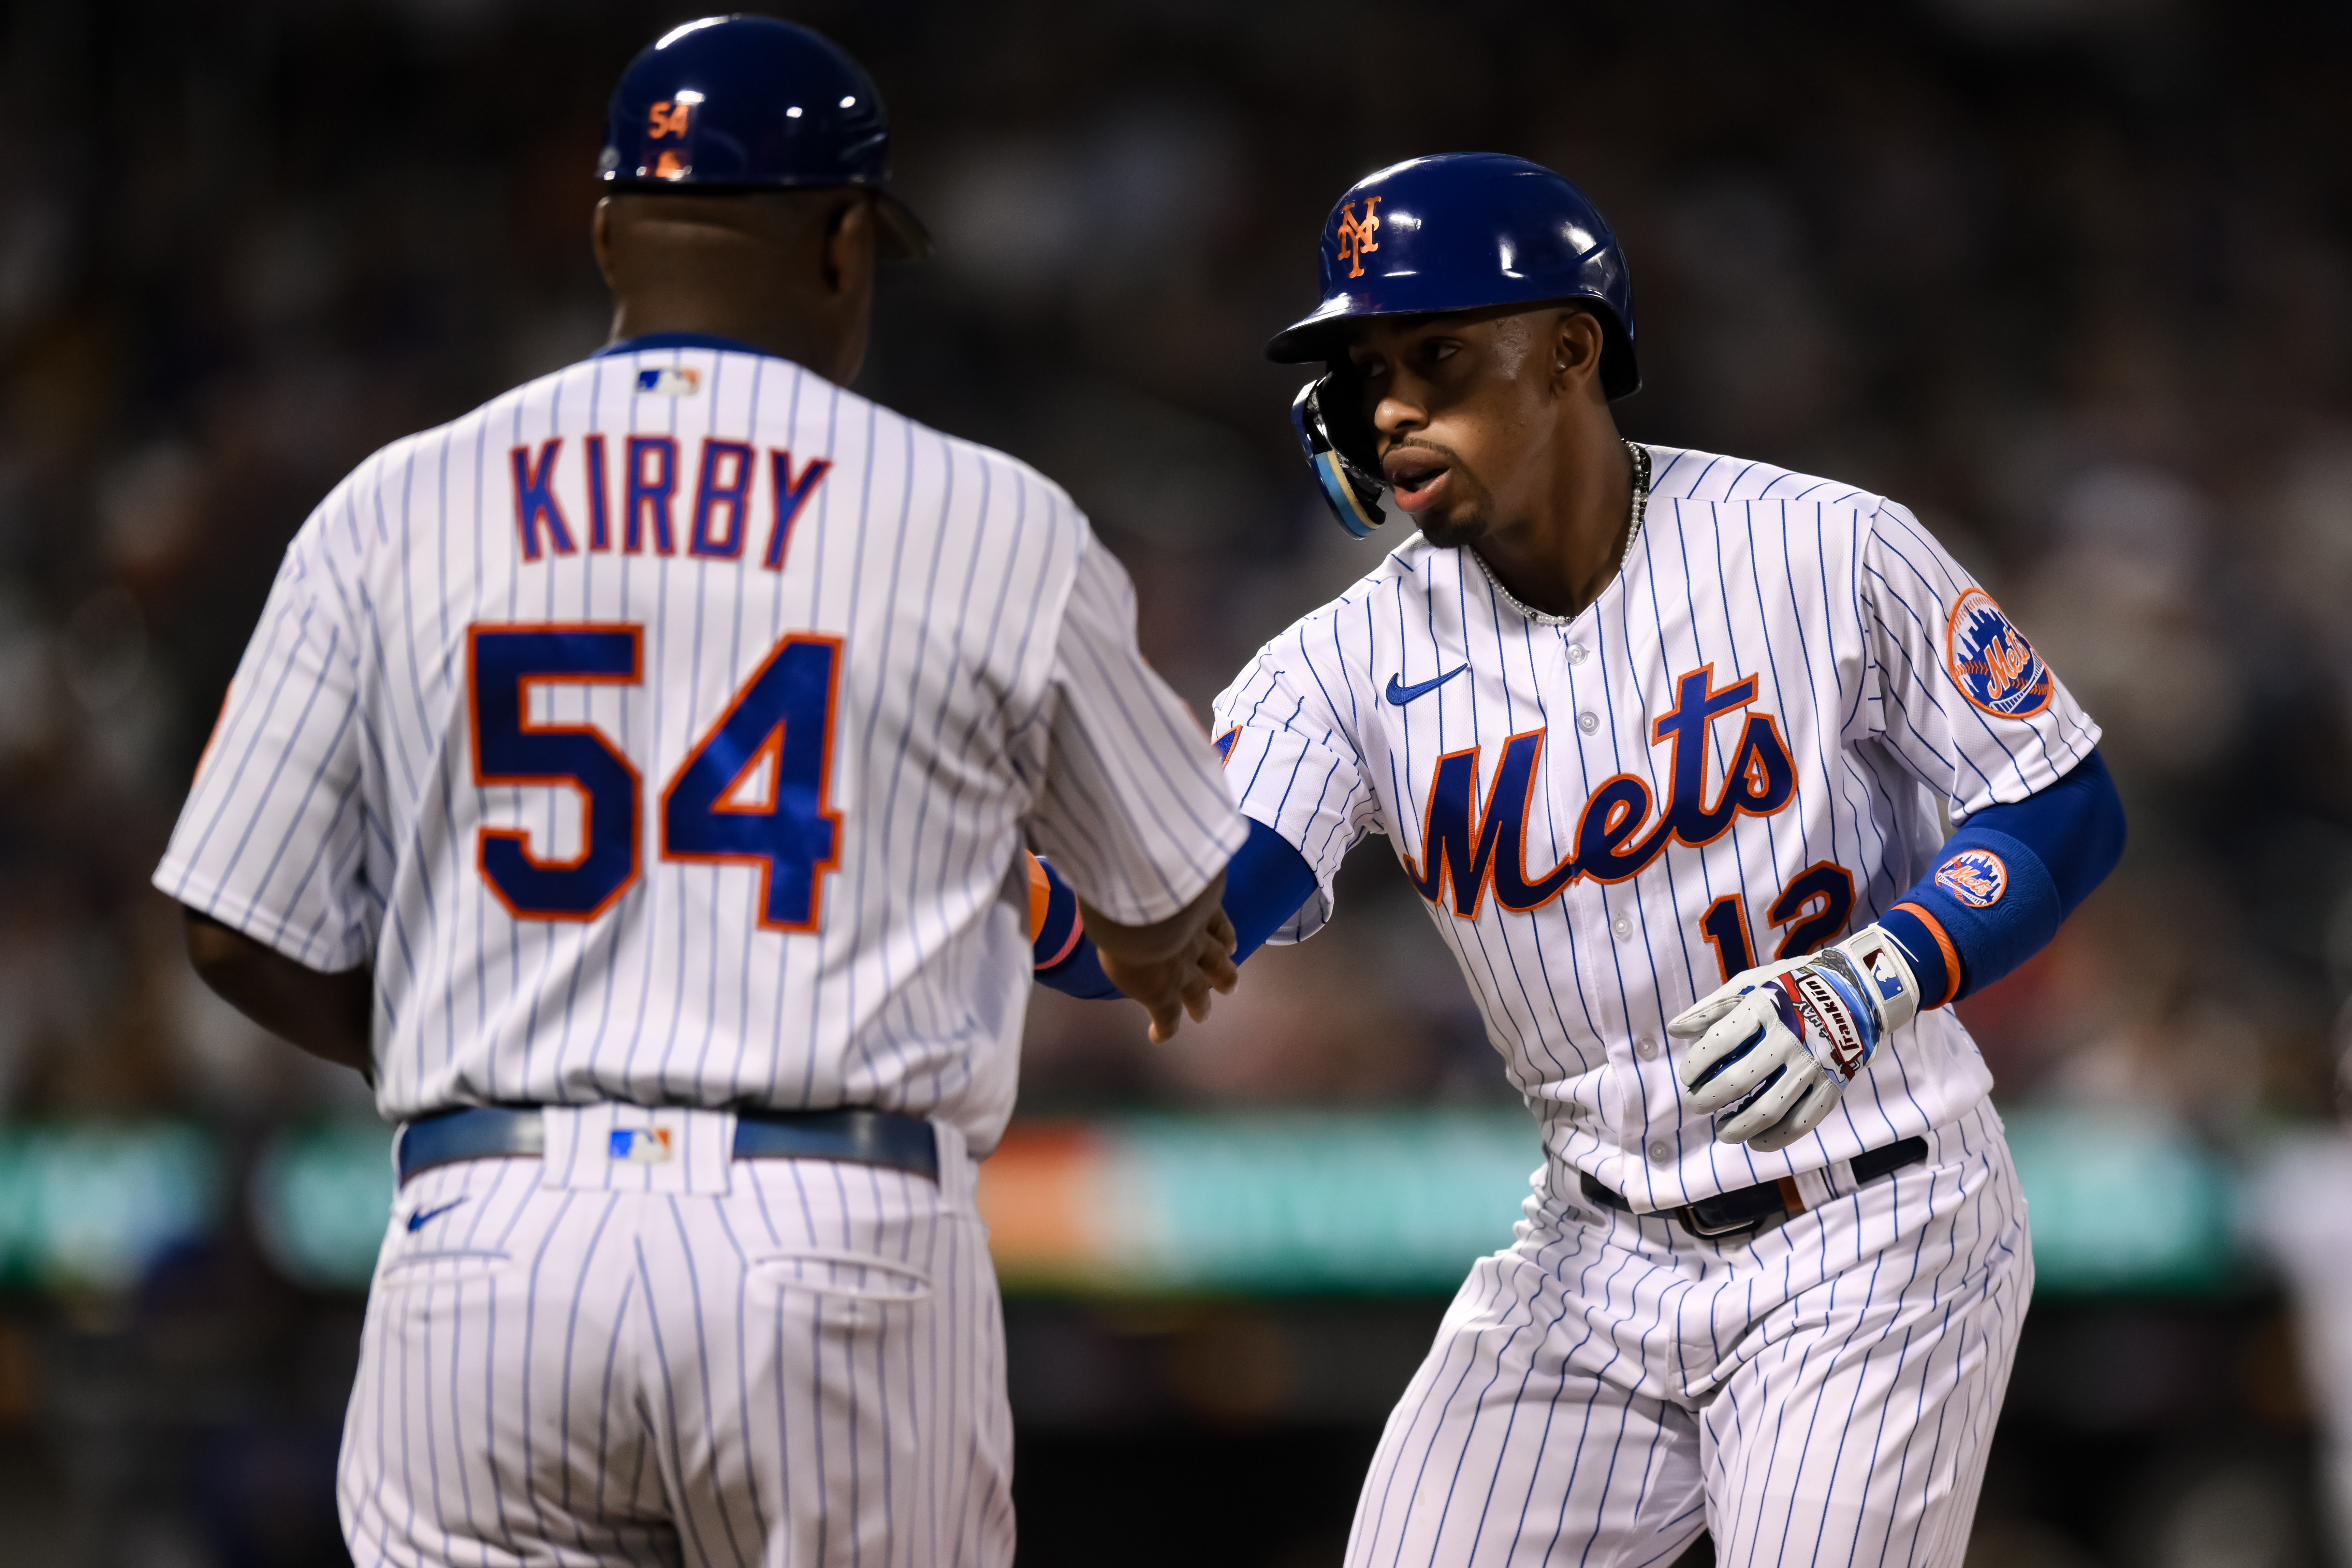 Surging Cubs beat the Mets 3-2 at Citi Field